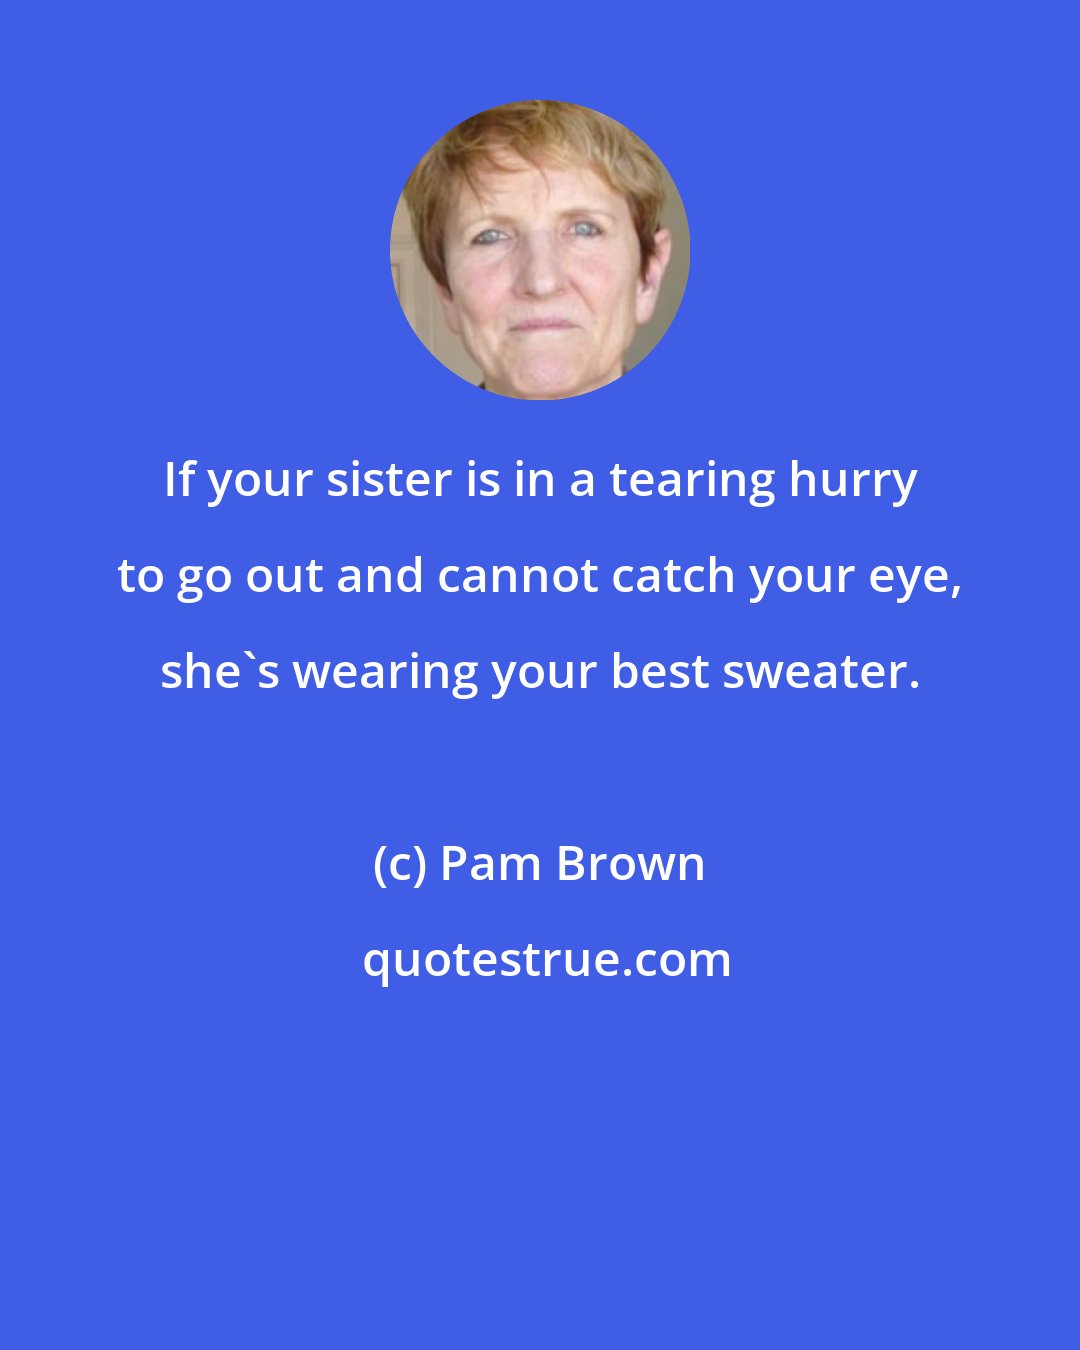 Pam Brown: If your sister is in a tearing hurry to go out and cannot catch your eye, she's wearing your best sweater.